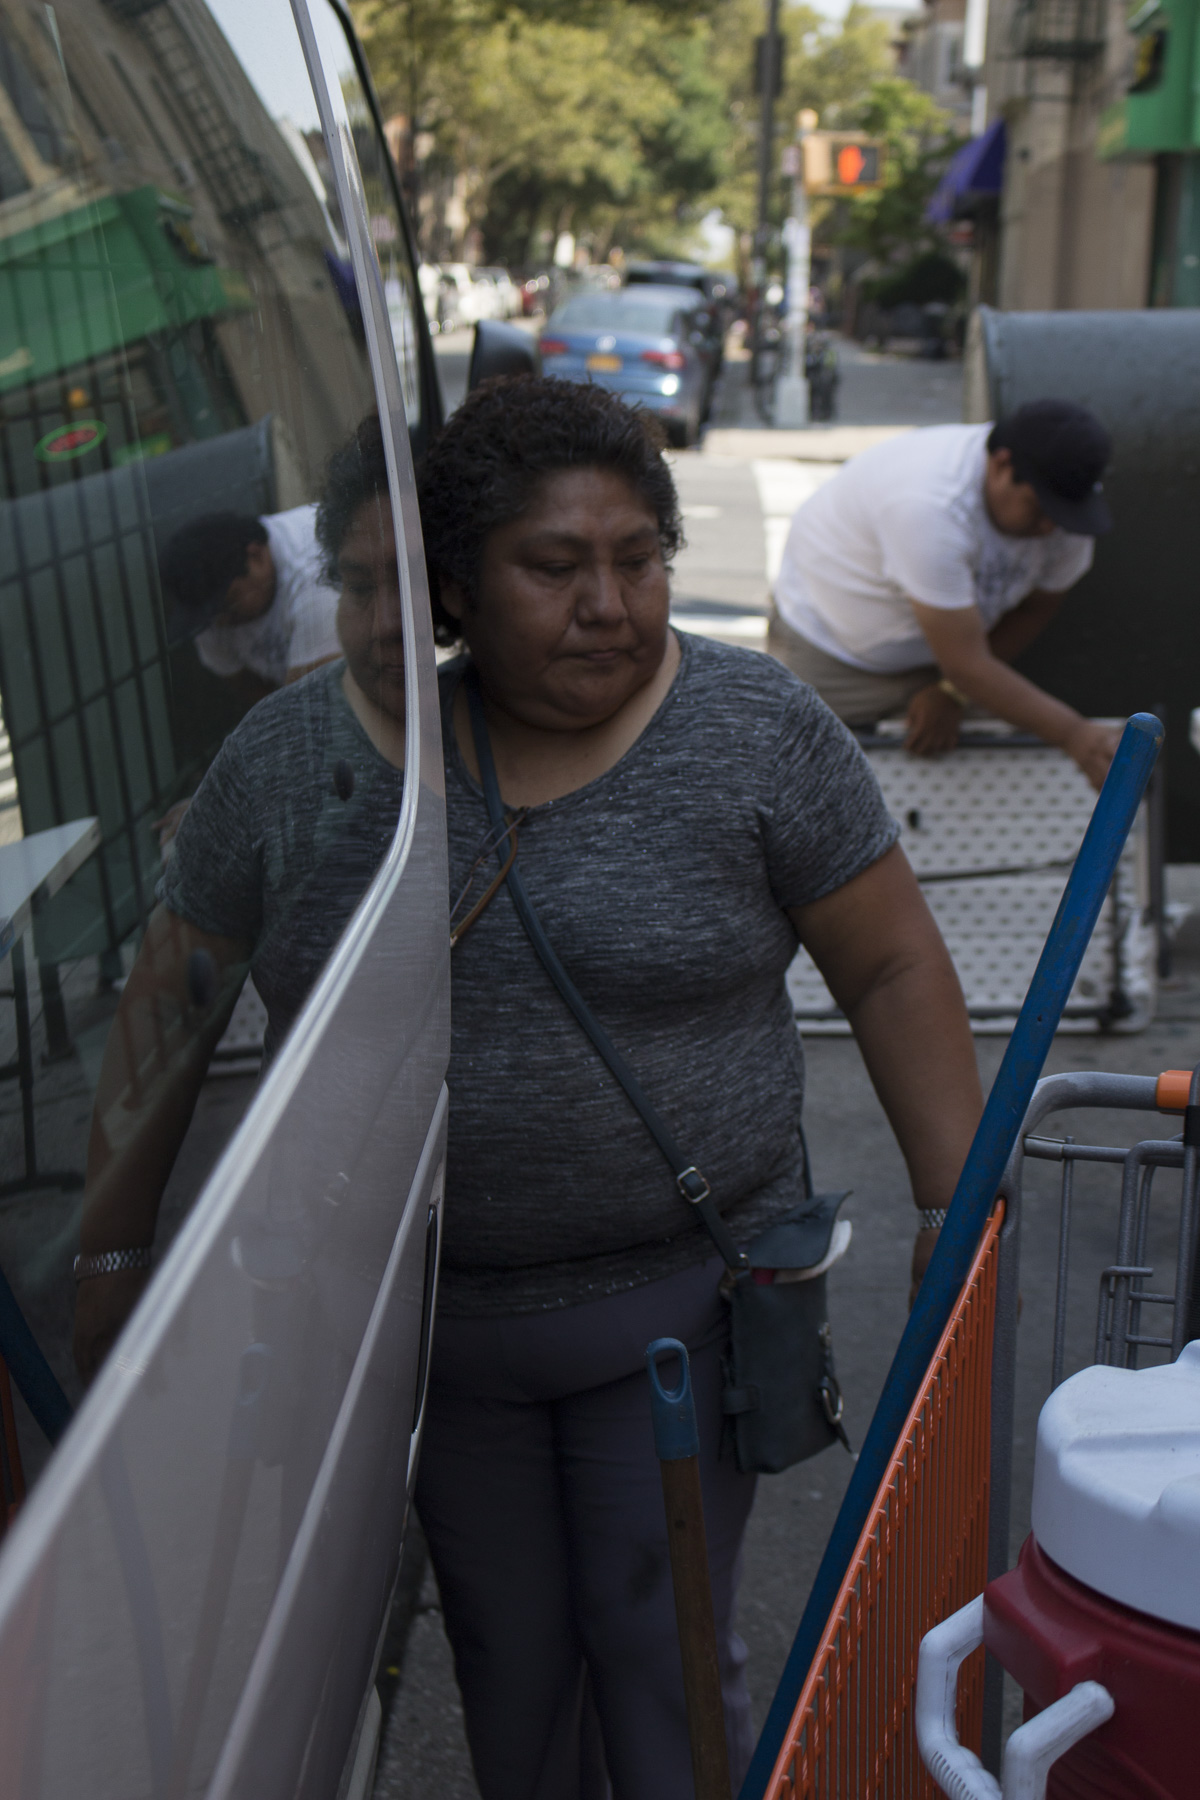  Teodosia unpacks her truck each day in Sunset Park, Brooklyn. On August 22nd, 2017, she had the help of her son Sergio. 